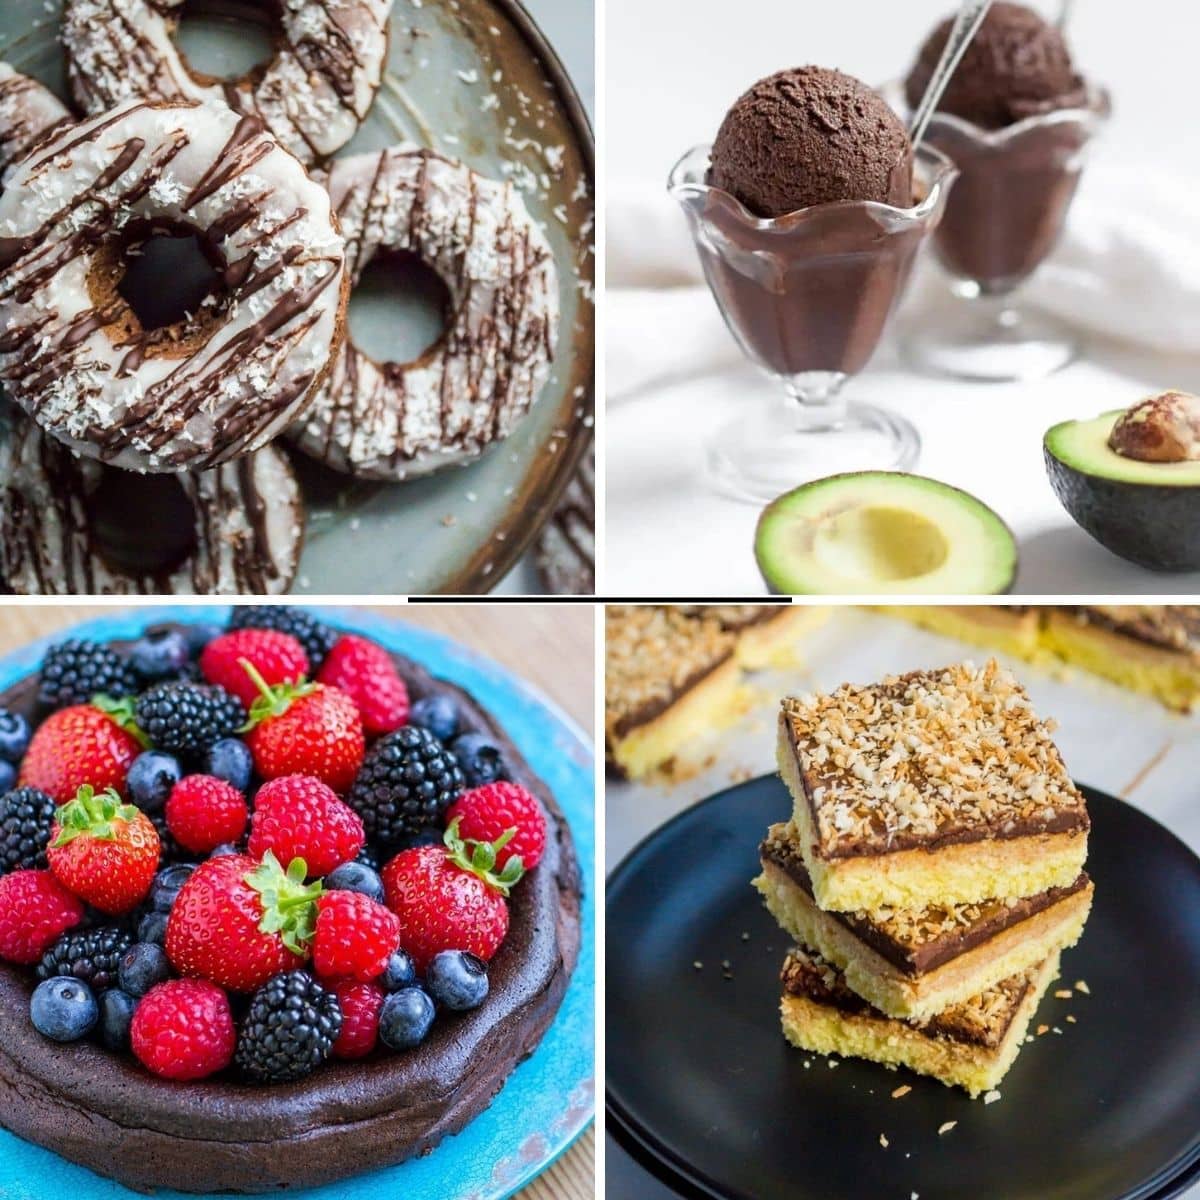 17 Amazingly Awesome Low Carb Desserts